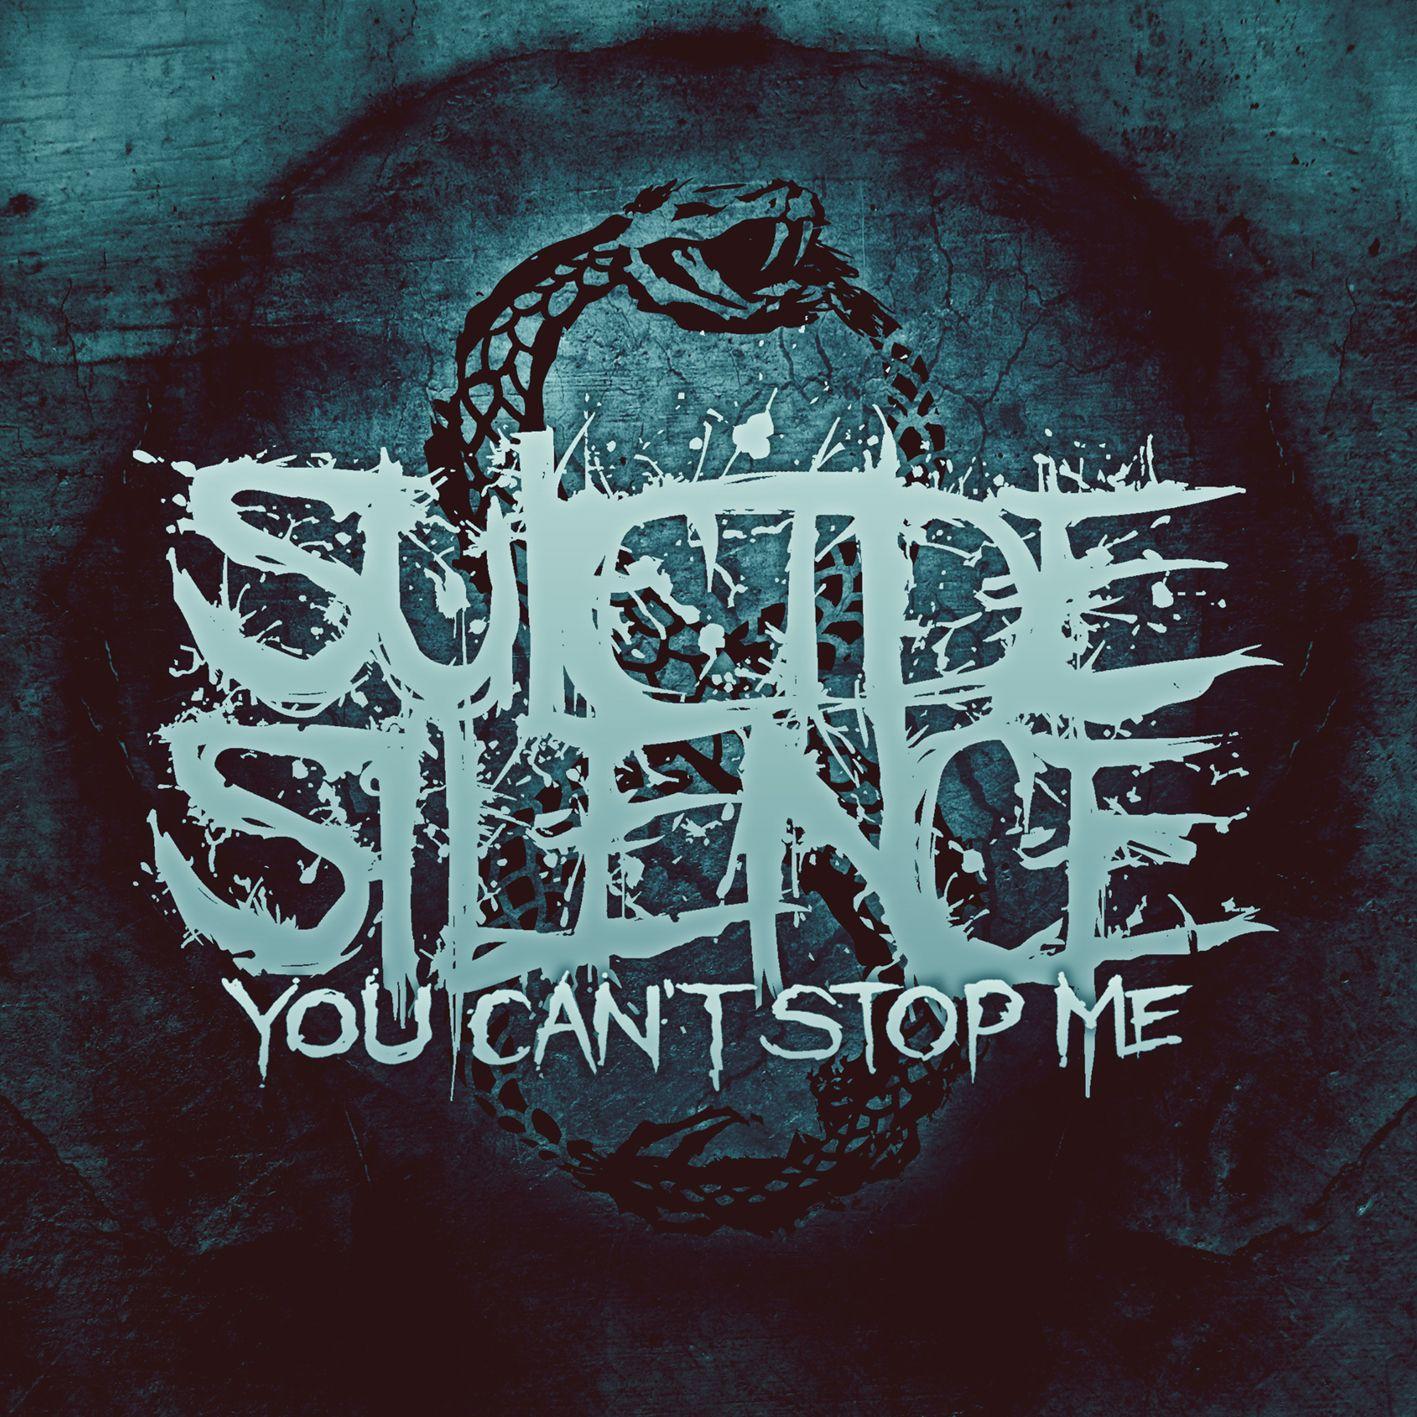 SUICIDE SILENCE - 'Don't Die' lyric video